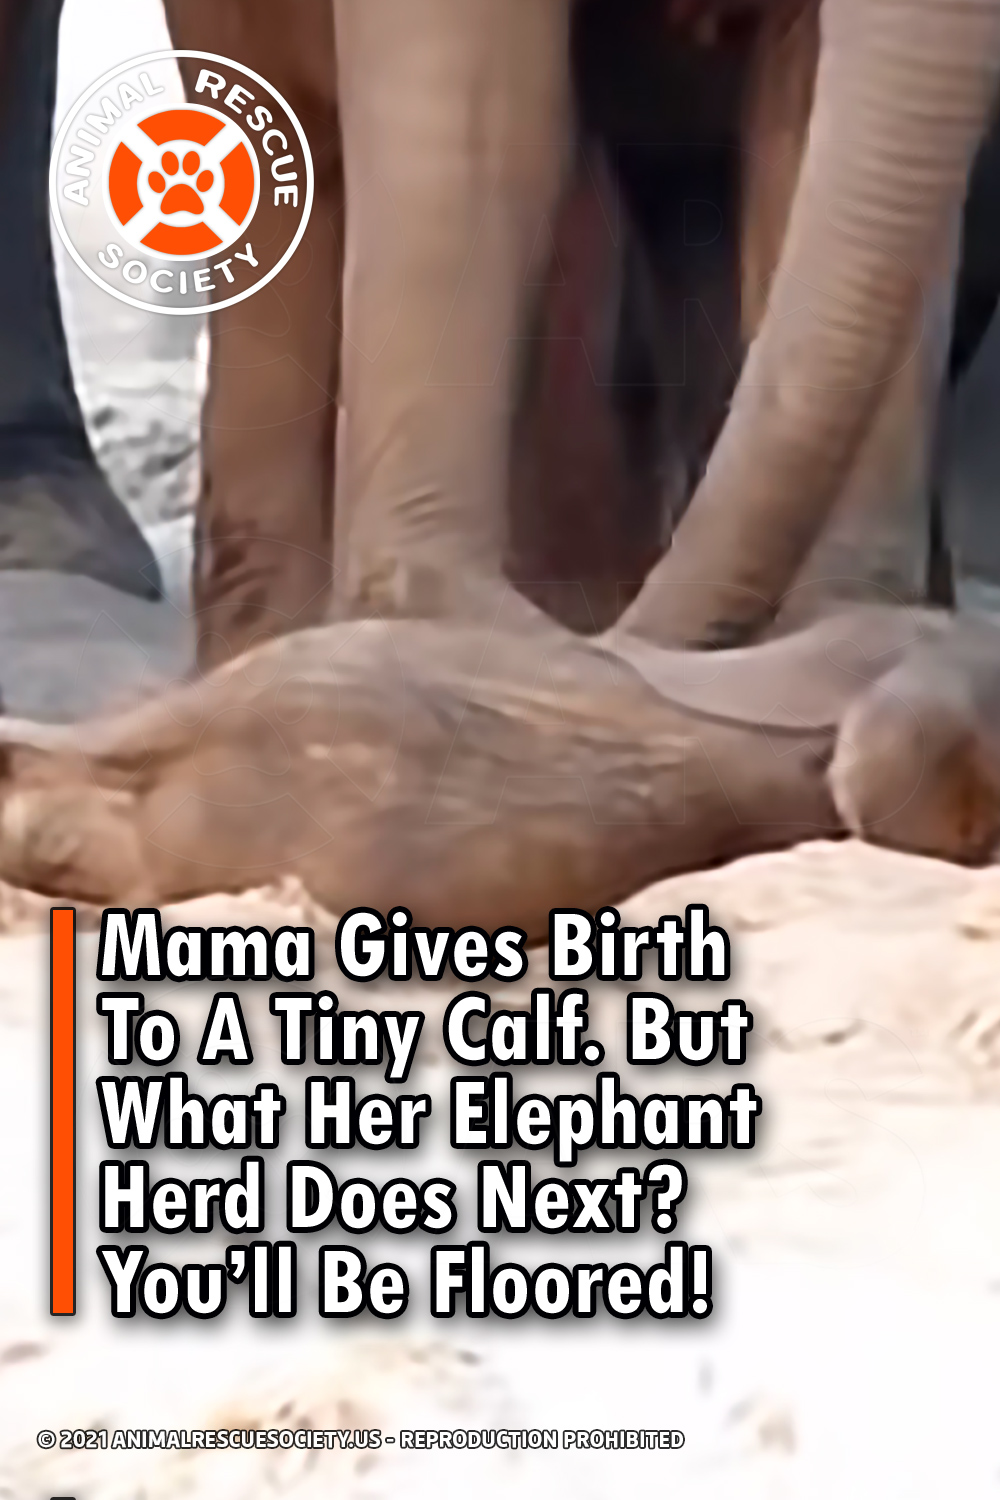 Mama Gives Birth To A Tiny Calf. But What Her Elephant Herd Does Next? You’ll Be Floored!